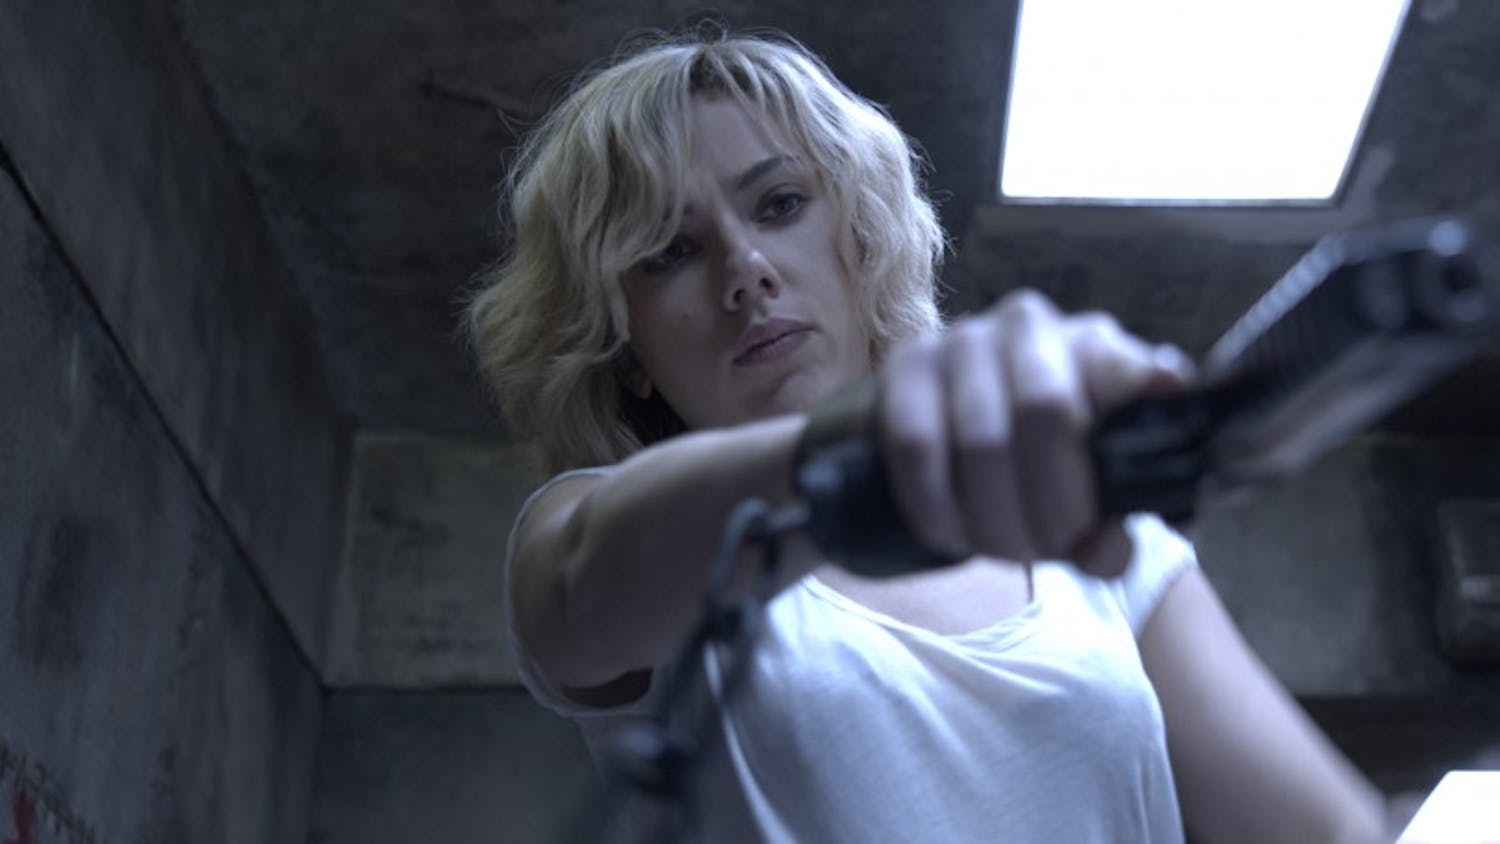 Writer/director Luc Besson directs SCARLETT JOHANSSON in ?Lucy?, an action-thriller that examines the possibility of what one human could truly do if she unlocked 100 percent of her brain capacity and accessed the furthest reaches of her mind. 